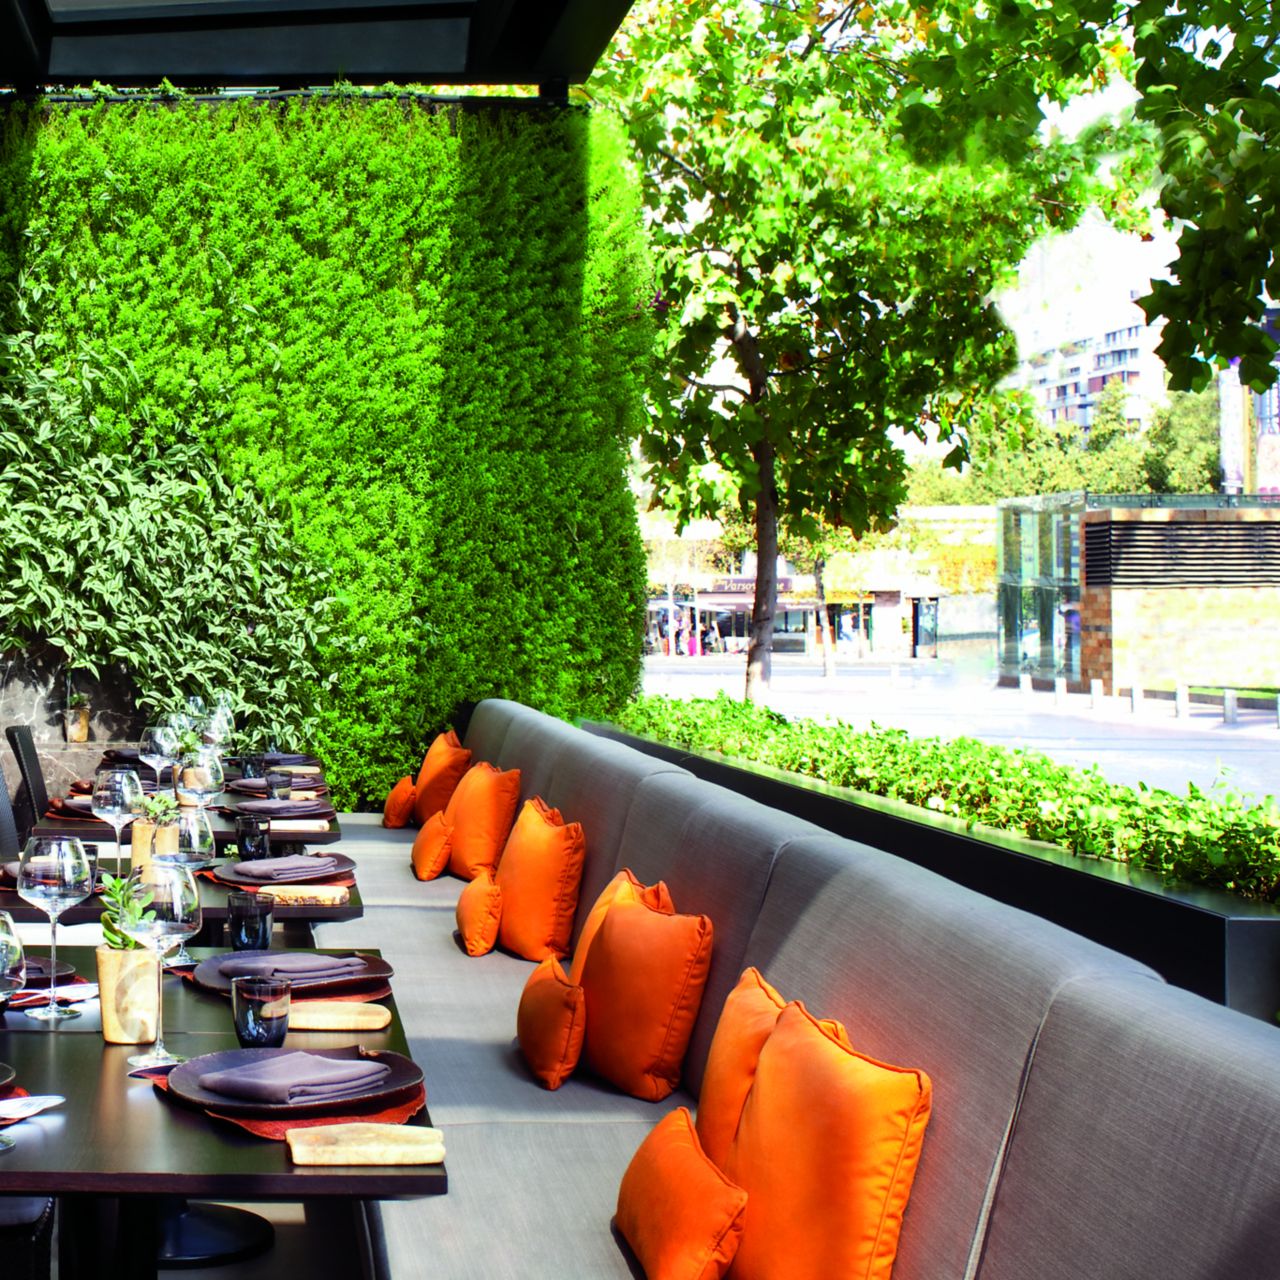 Covered patio with dining tables overlooking the street and surrounded by greenery